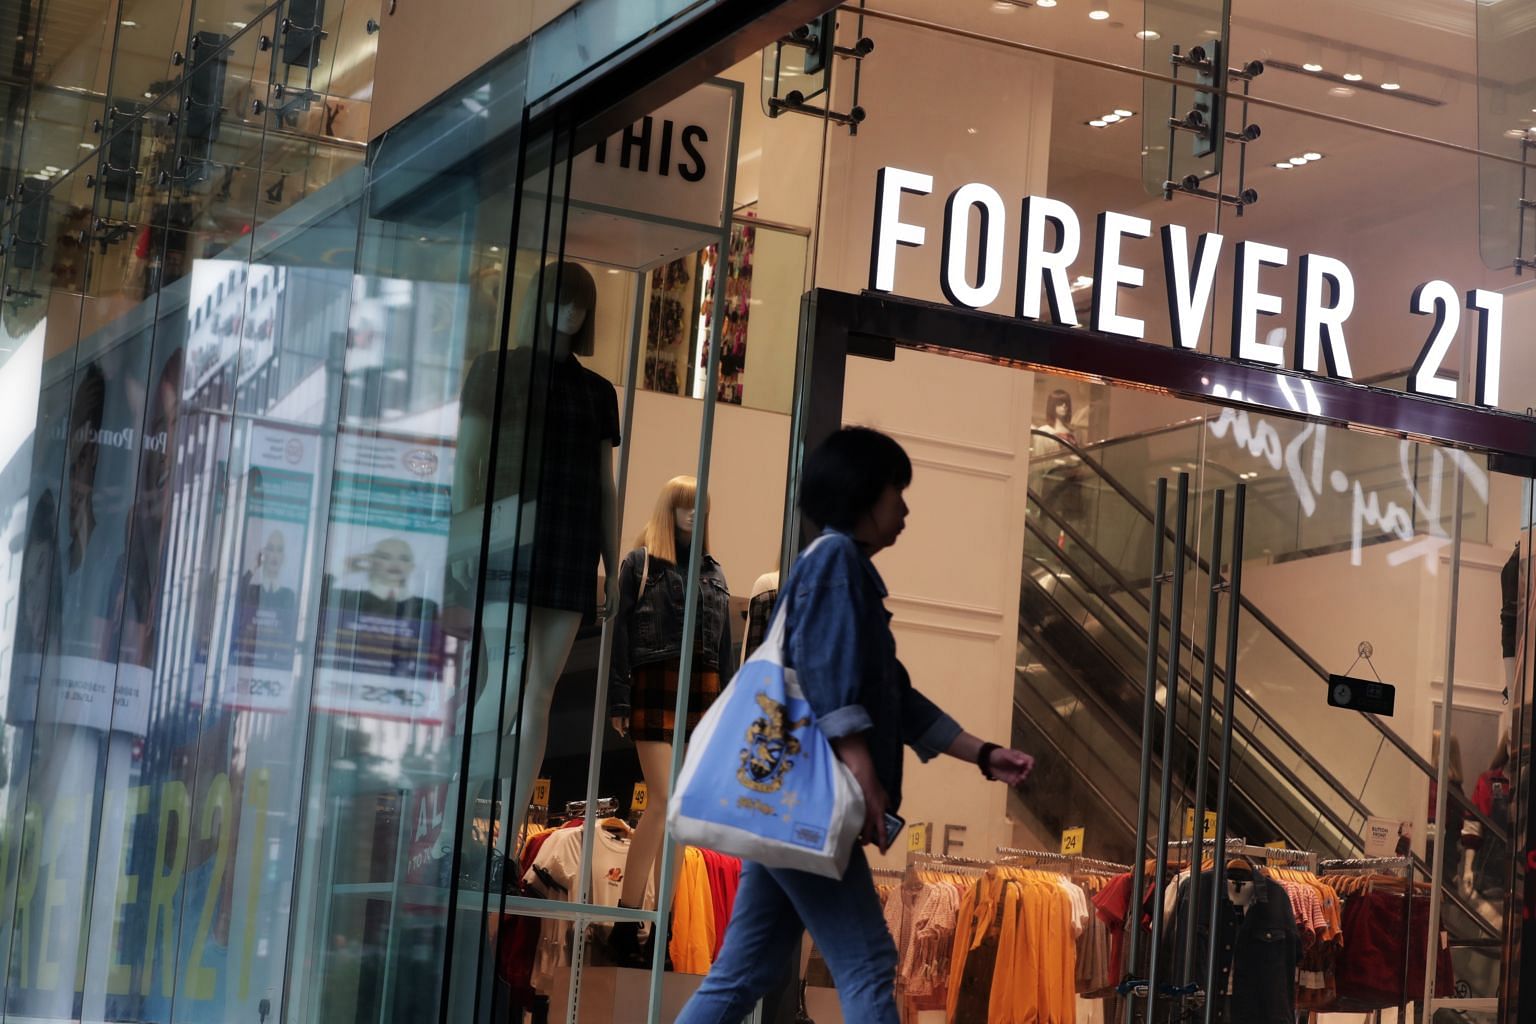 It's because I think too much: San Francisco's New Forever 21 Grand Opening